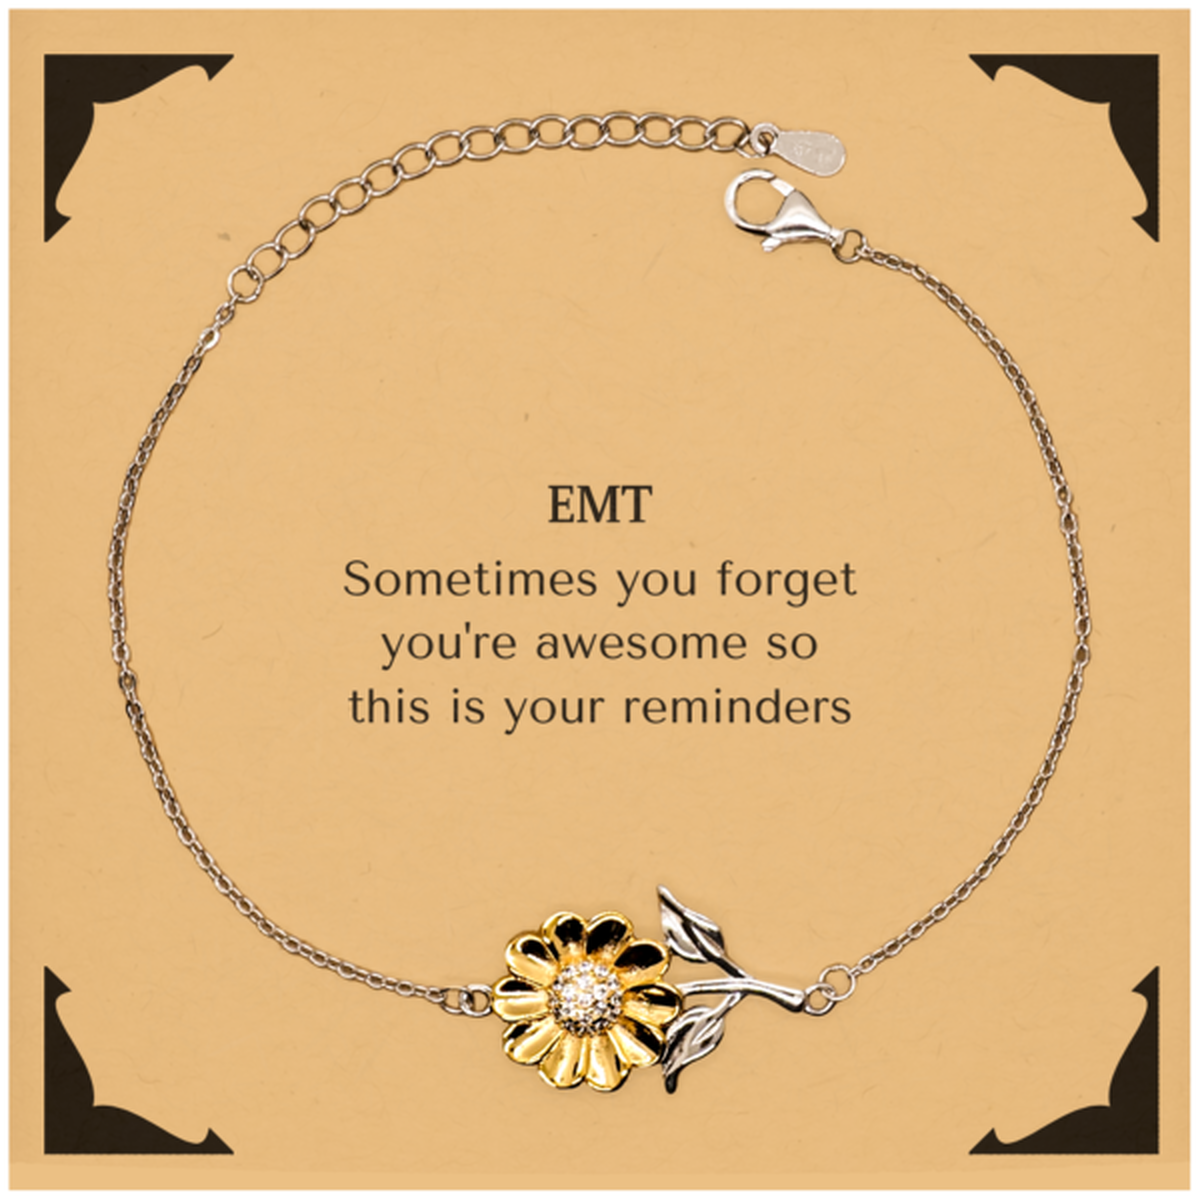 Sentimental EMT Sunflower Bracelet, EMT Sometimes you forget you're awesome so this is your reminders, Graduation Christmas Birthday Gifts for EMT, Men, Women, Coworkers